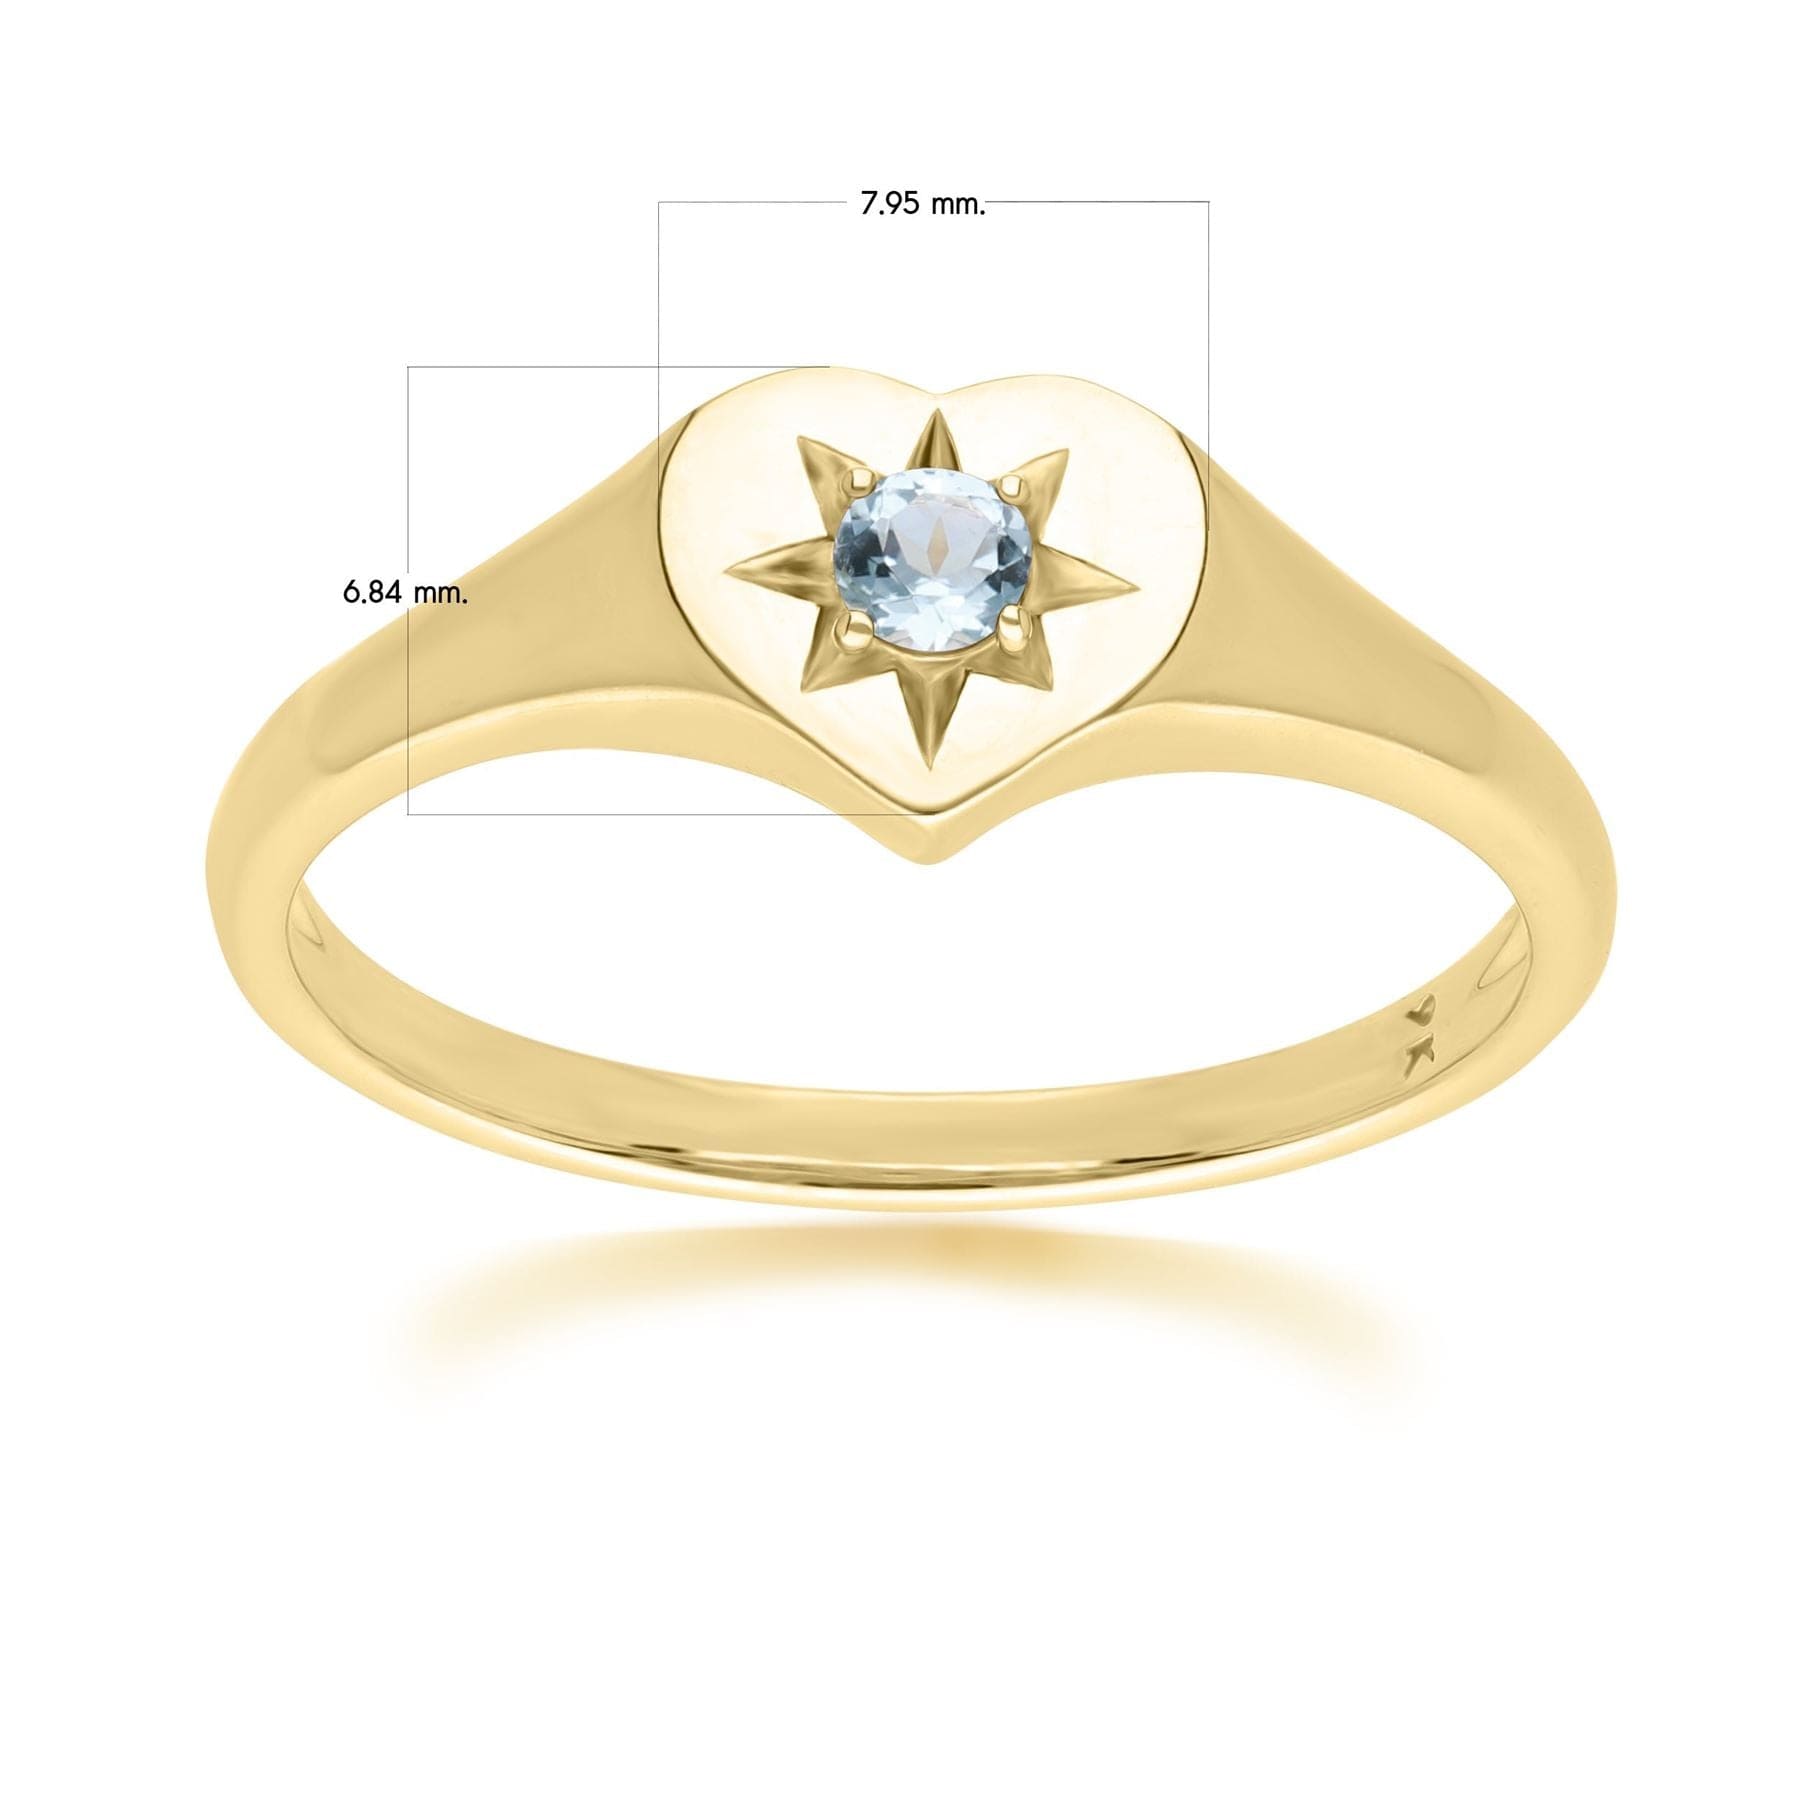 135R2055039 ECFEW™ 'The Liberator' Blue Topaz Heart Ring in 9ct Yellow Gold Dimensions